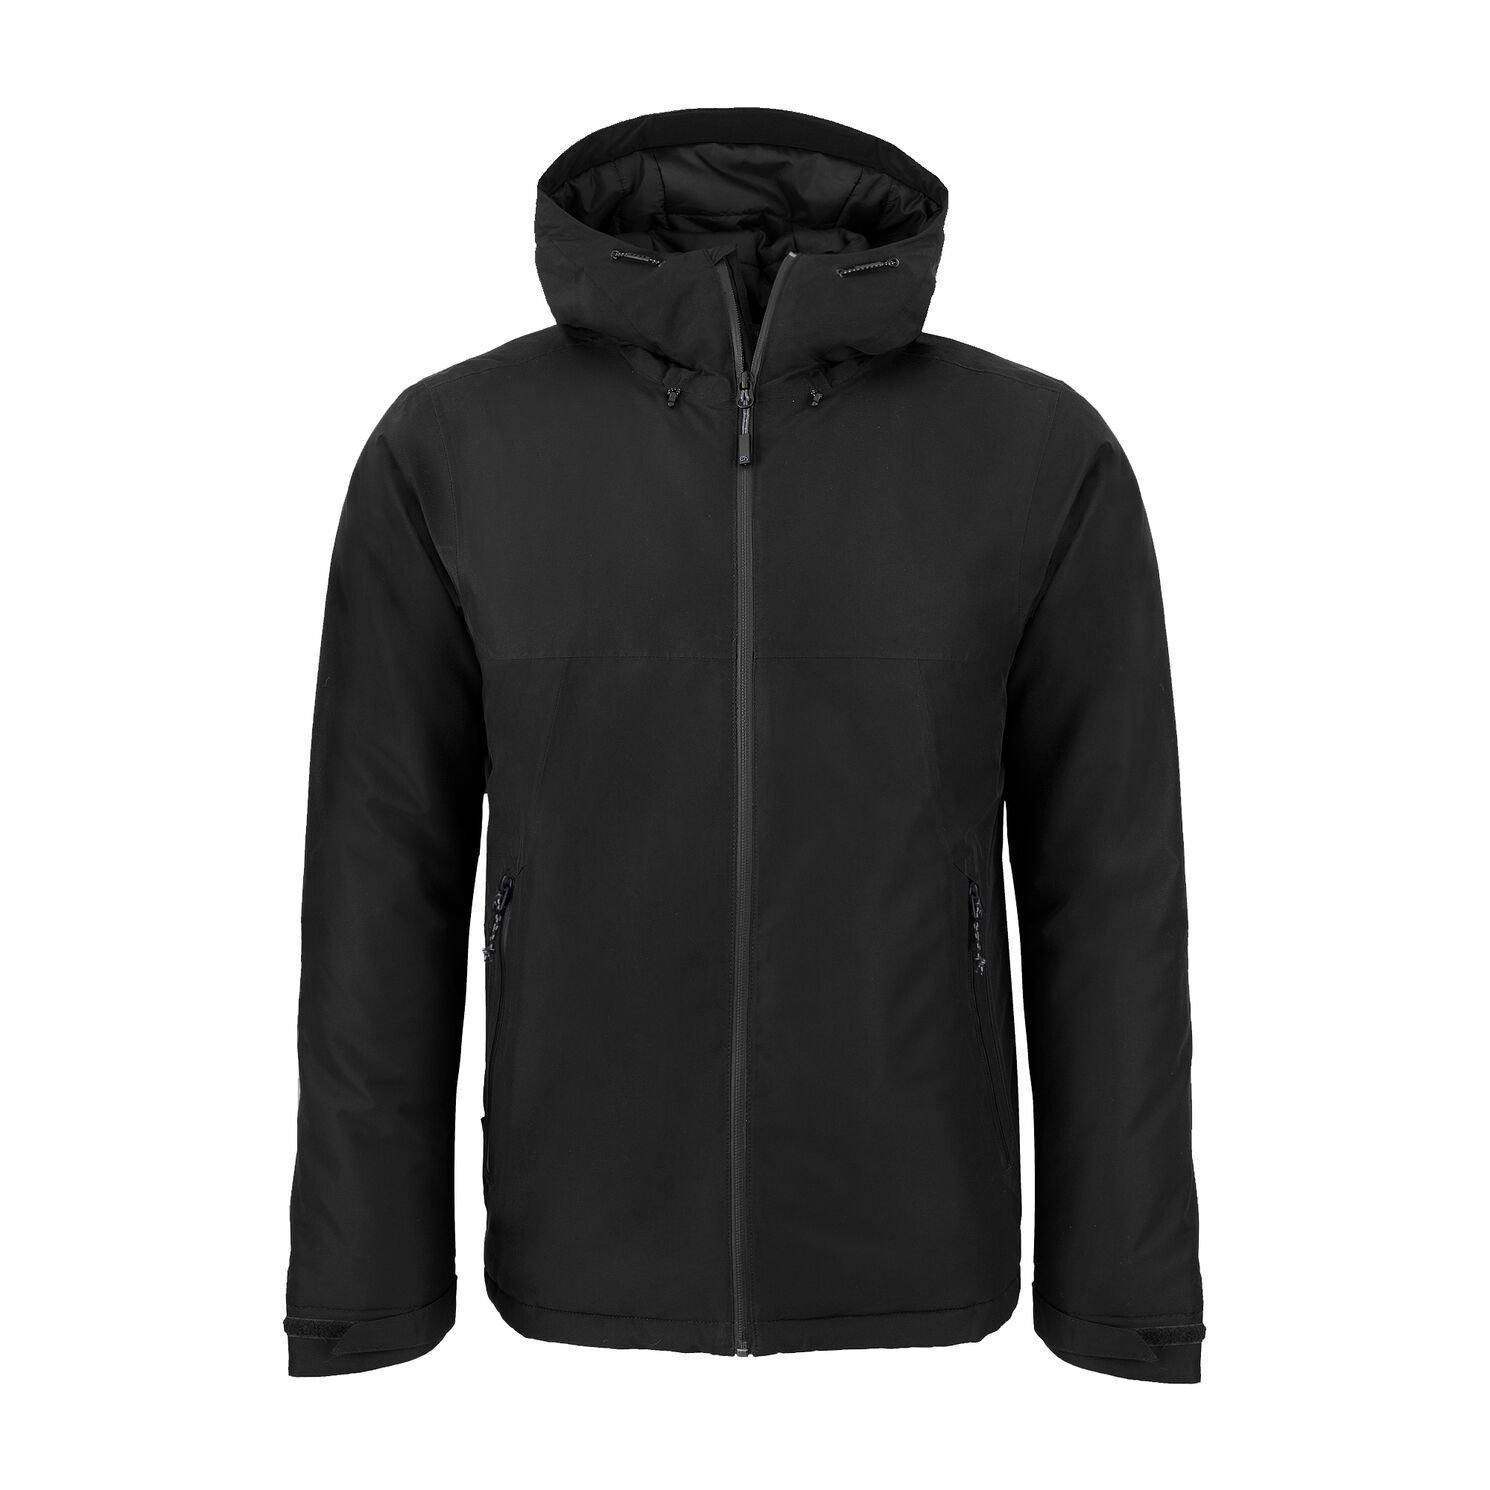 Unisex Expert Thermic Insulated Jacket by Craghoppers - The Luxury Promotional Gifts Company Limited